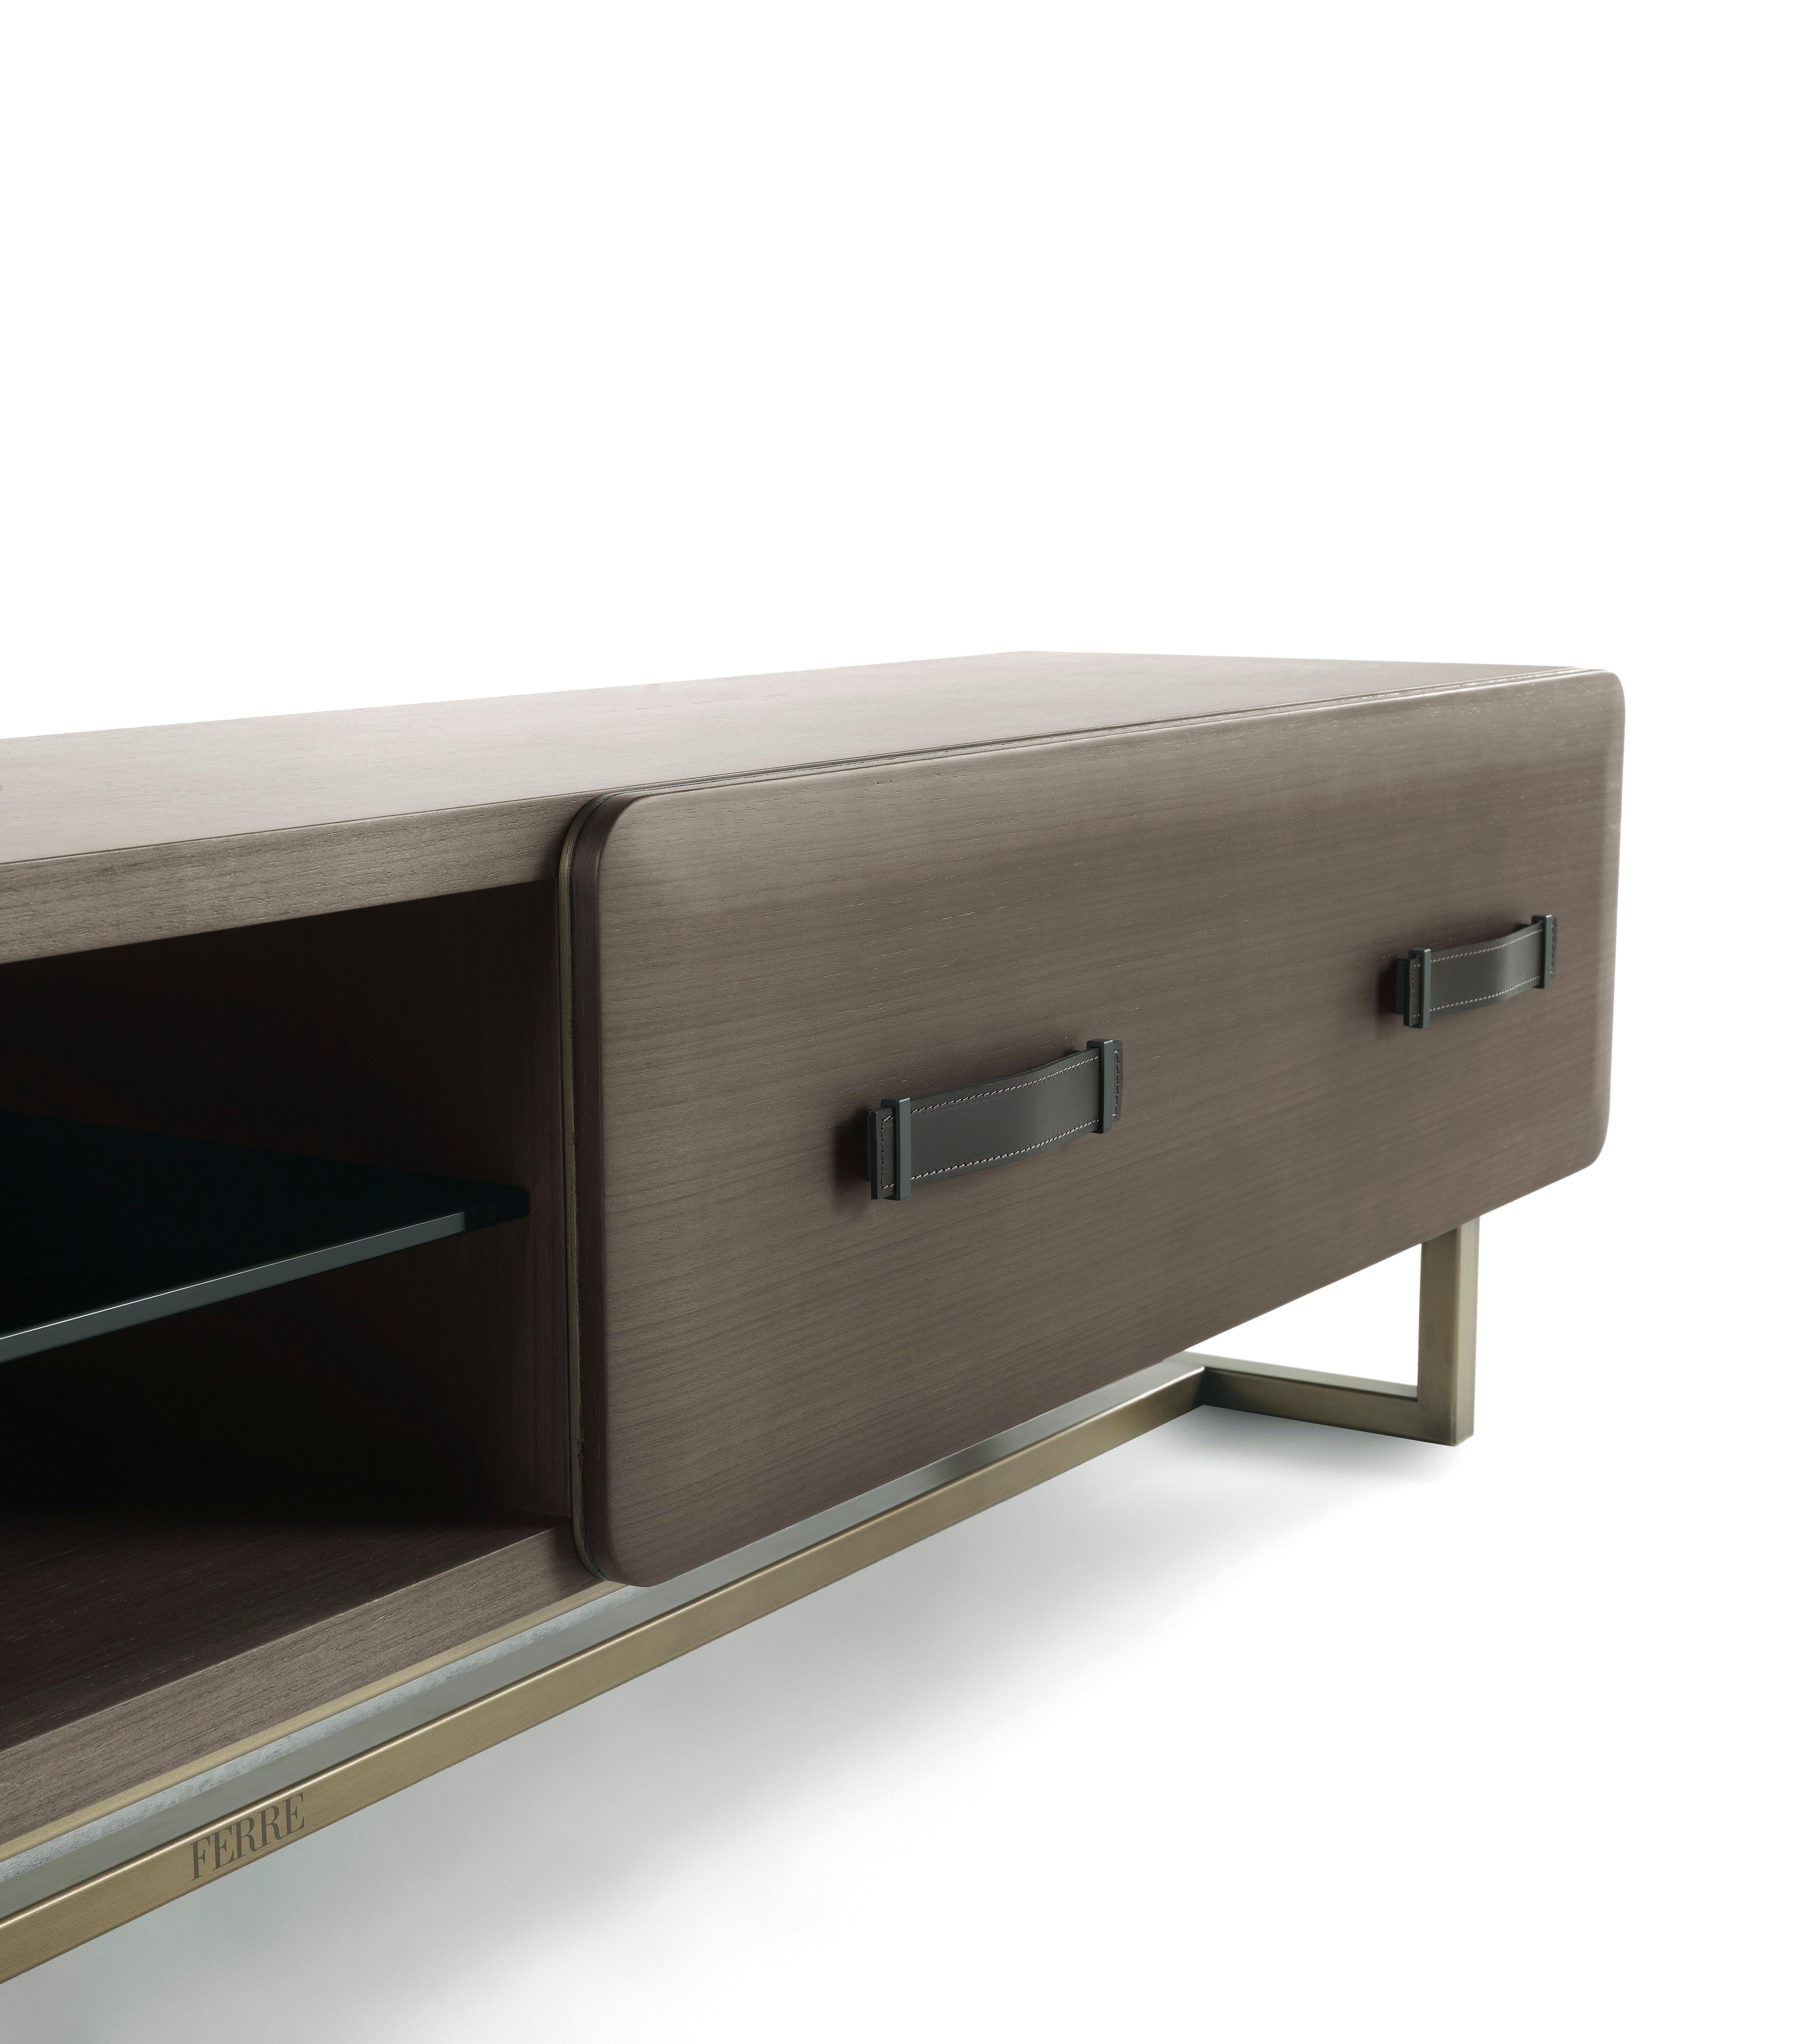 Fine marble, precious woods and bright metallic finishes. A special composition of different materials for furniture with a metropolitan and unconventional charm.
Five Points TV holder with Structure in wood, Tay Veneered Dyed Smokey Grey. Front